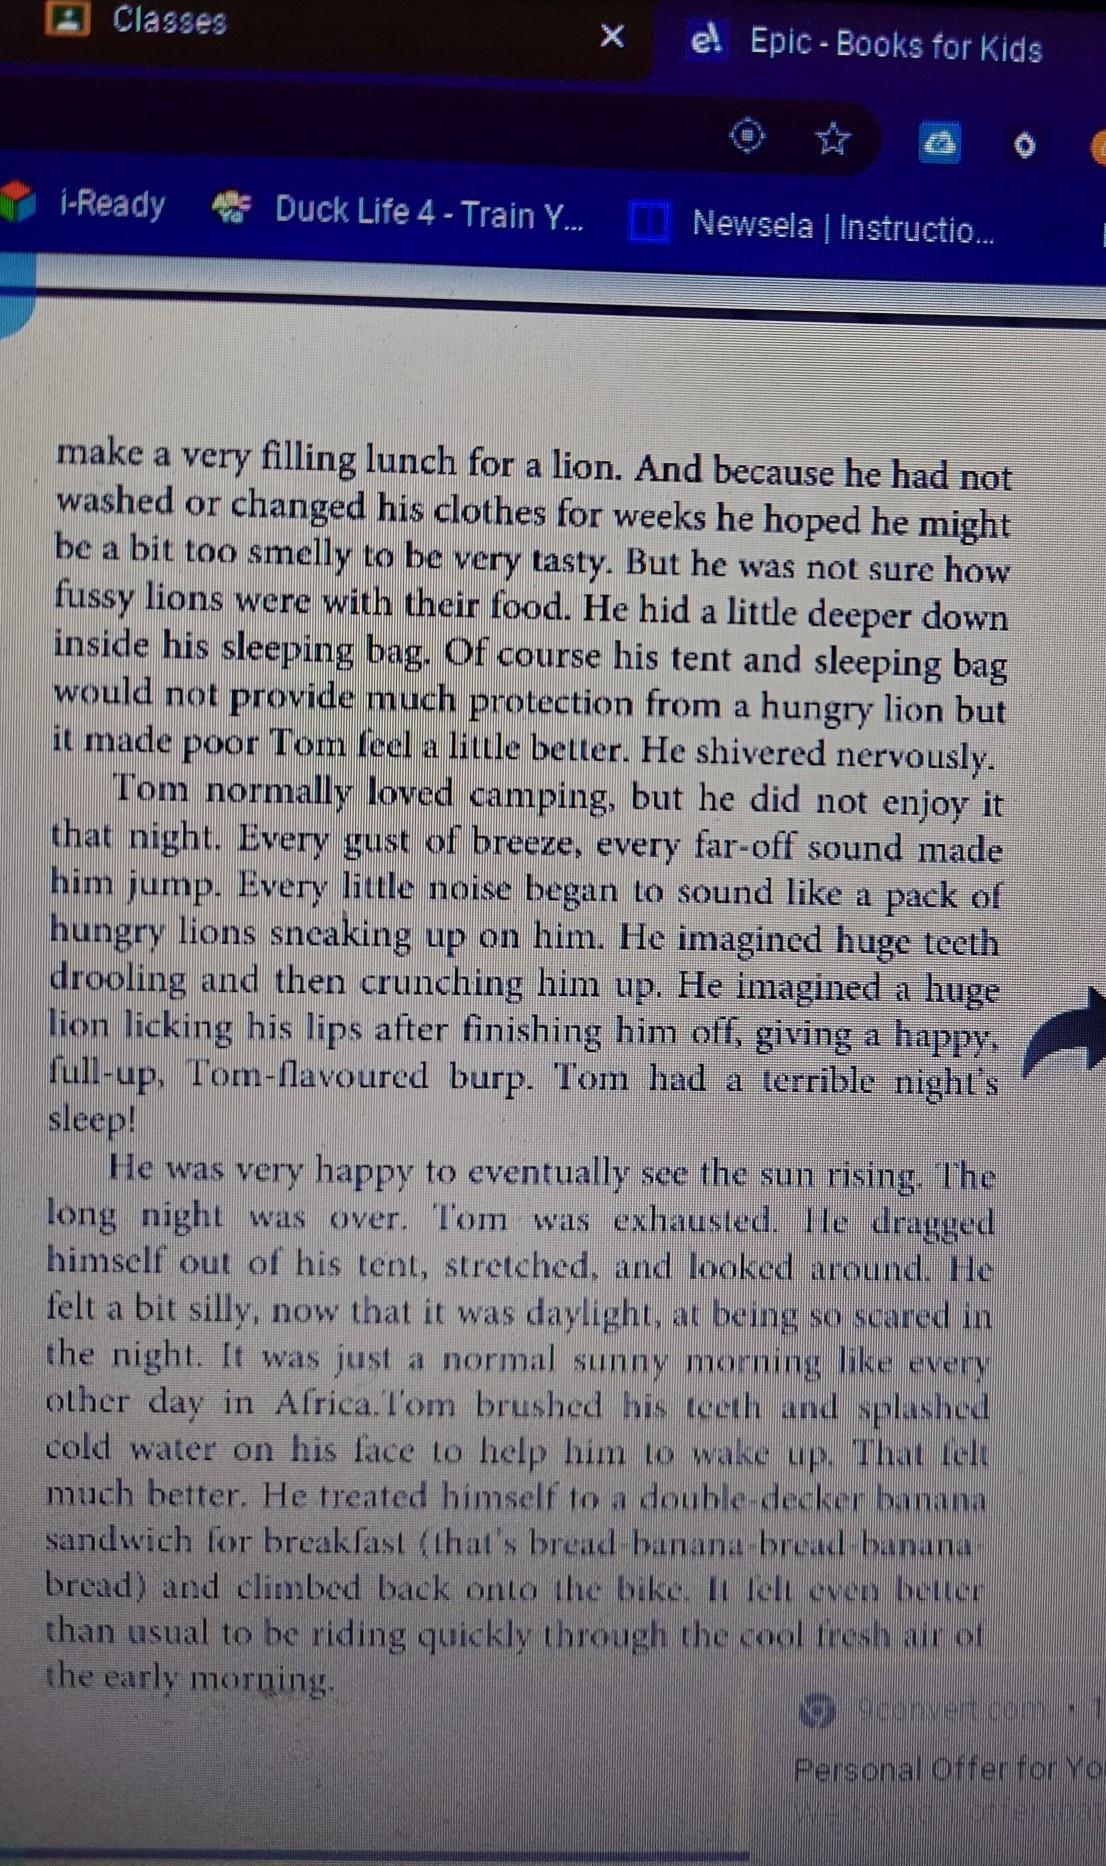 Why Did Tom Not Enjoy His Night In The Tent?